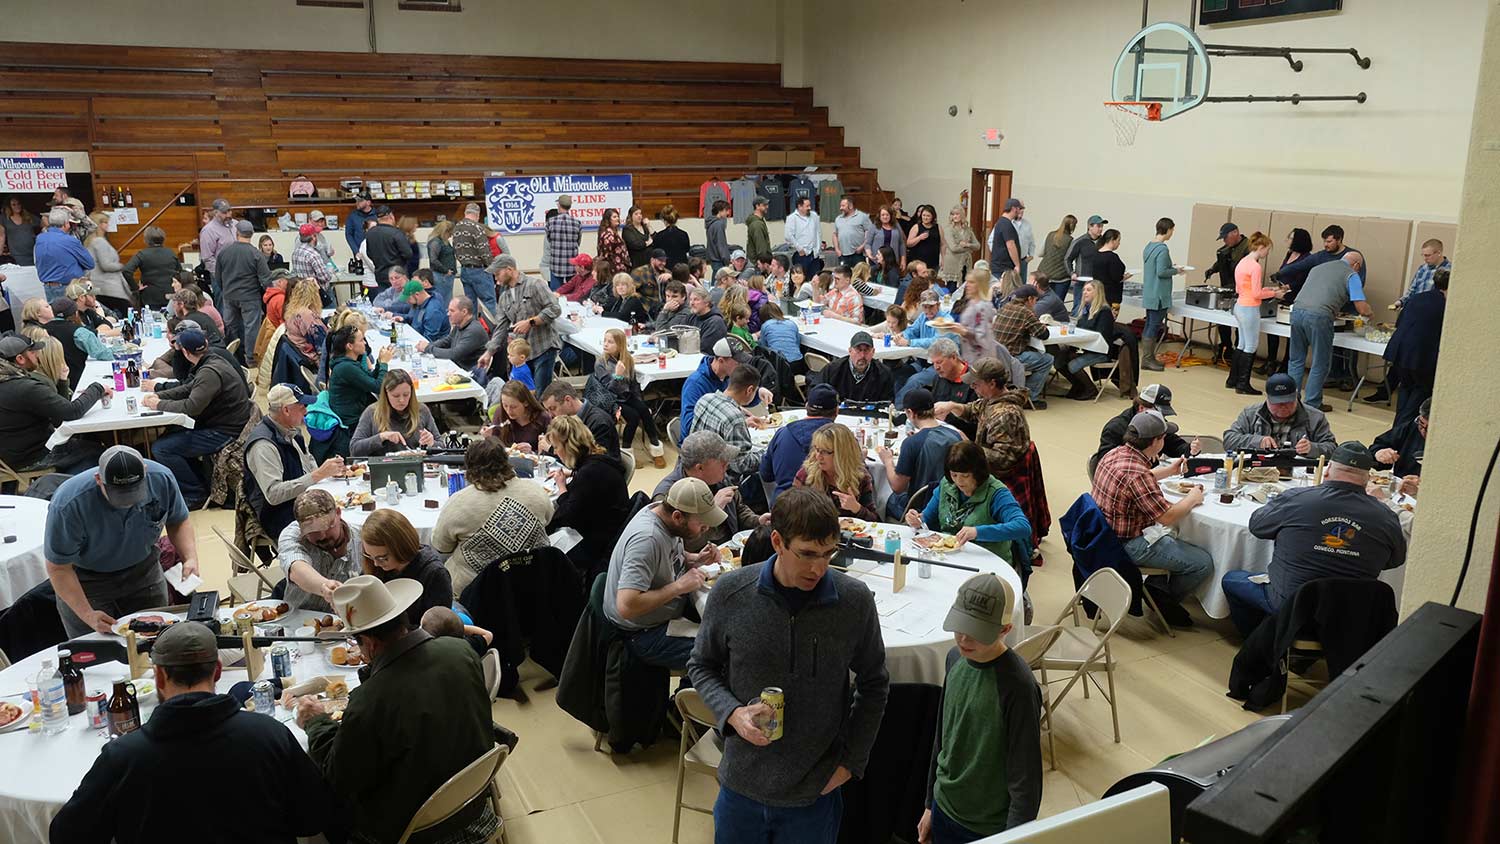 A conservation banquet in Glasgow, Montana.